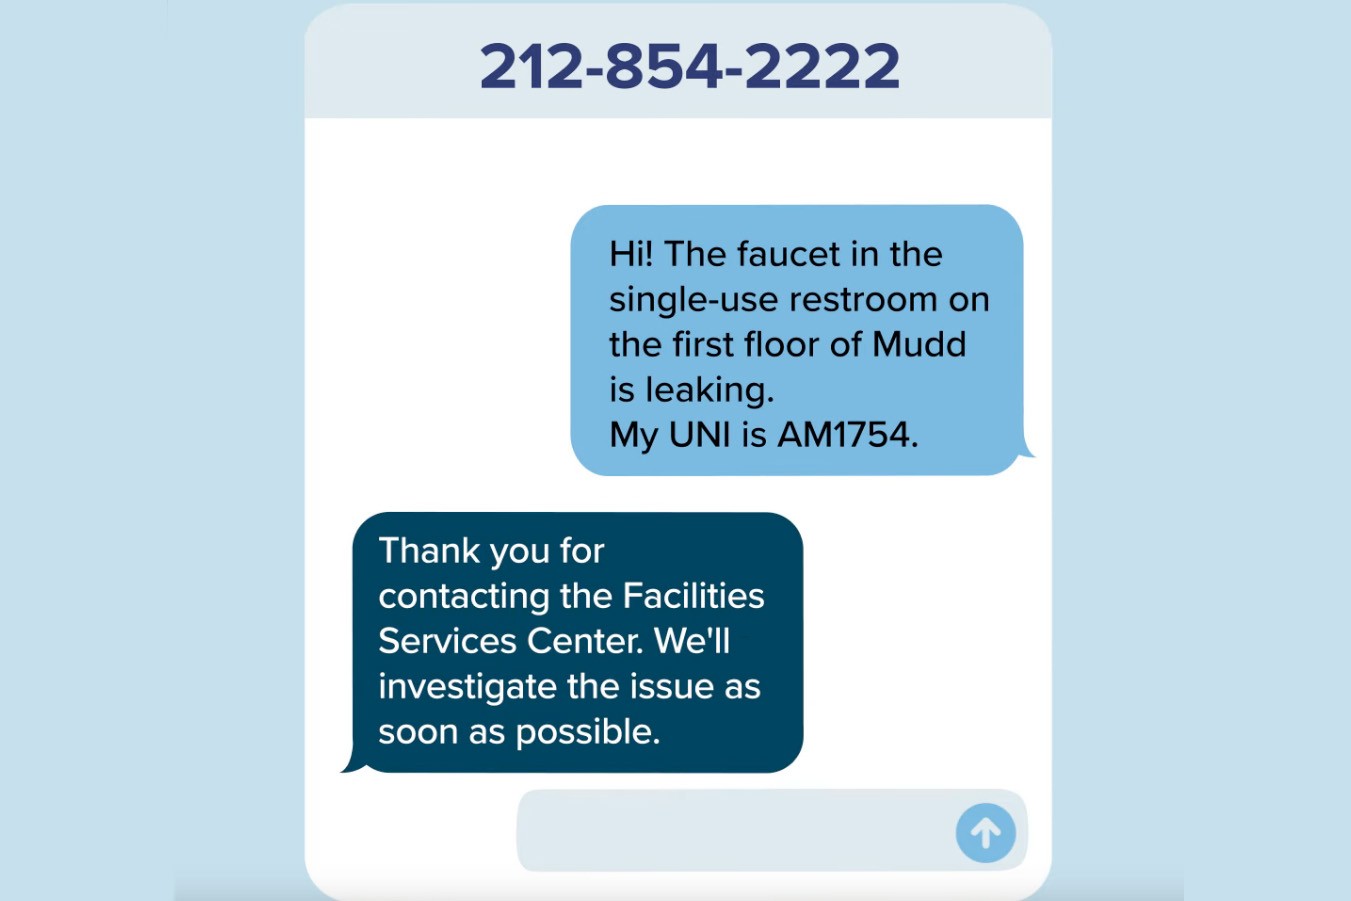 A graphic that shows a text conversation between a Columbia affiliate and the Services Center about a requested service.